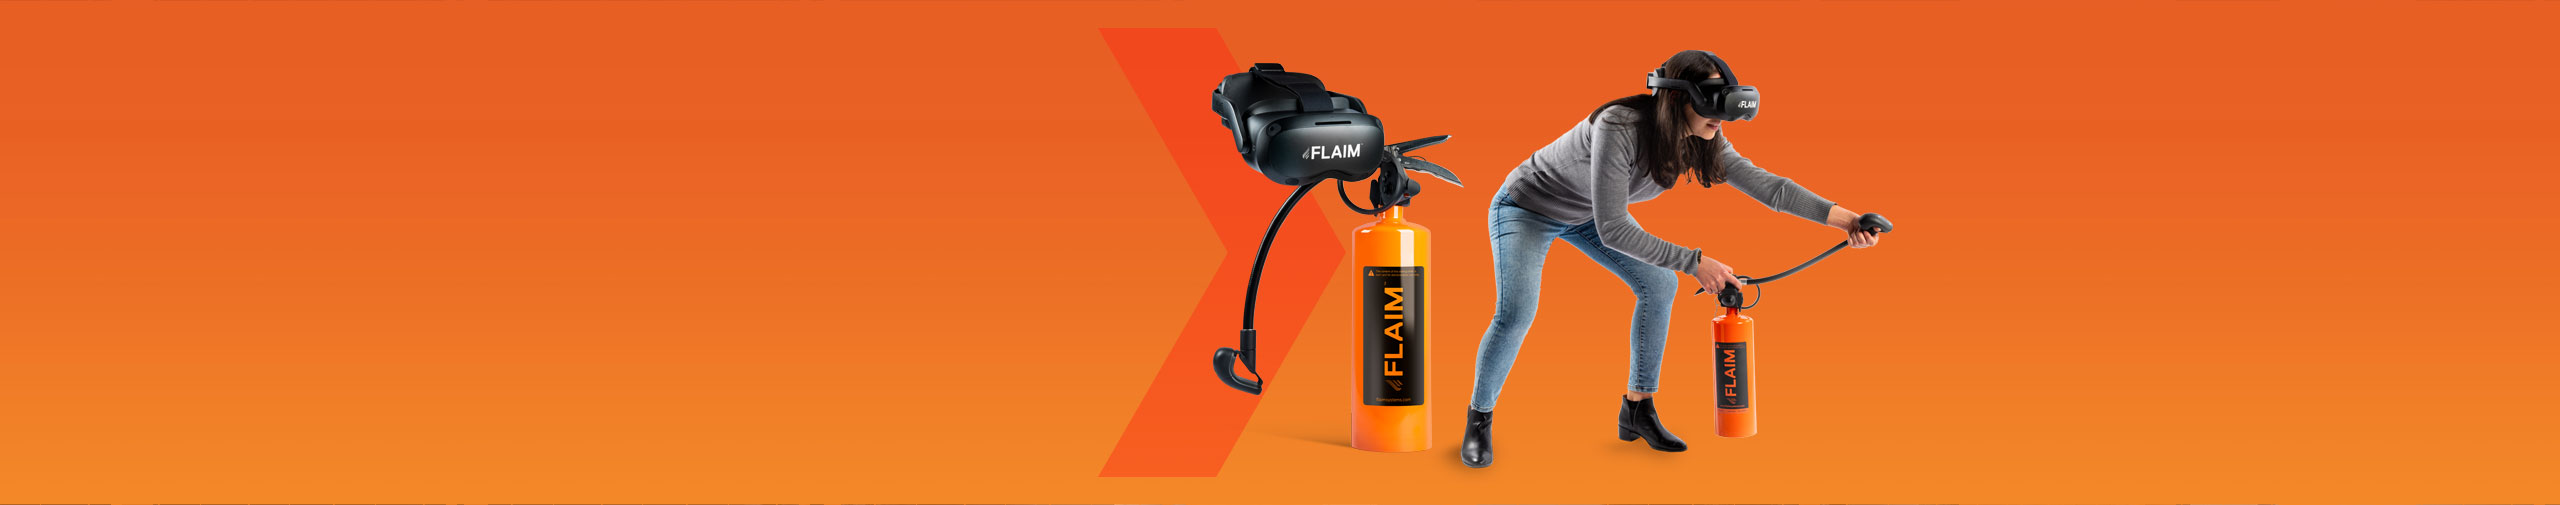 FLAIM Virtual Reality Fire Safety Training Systems